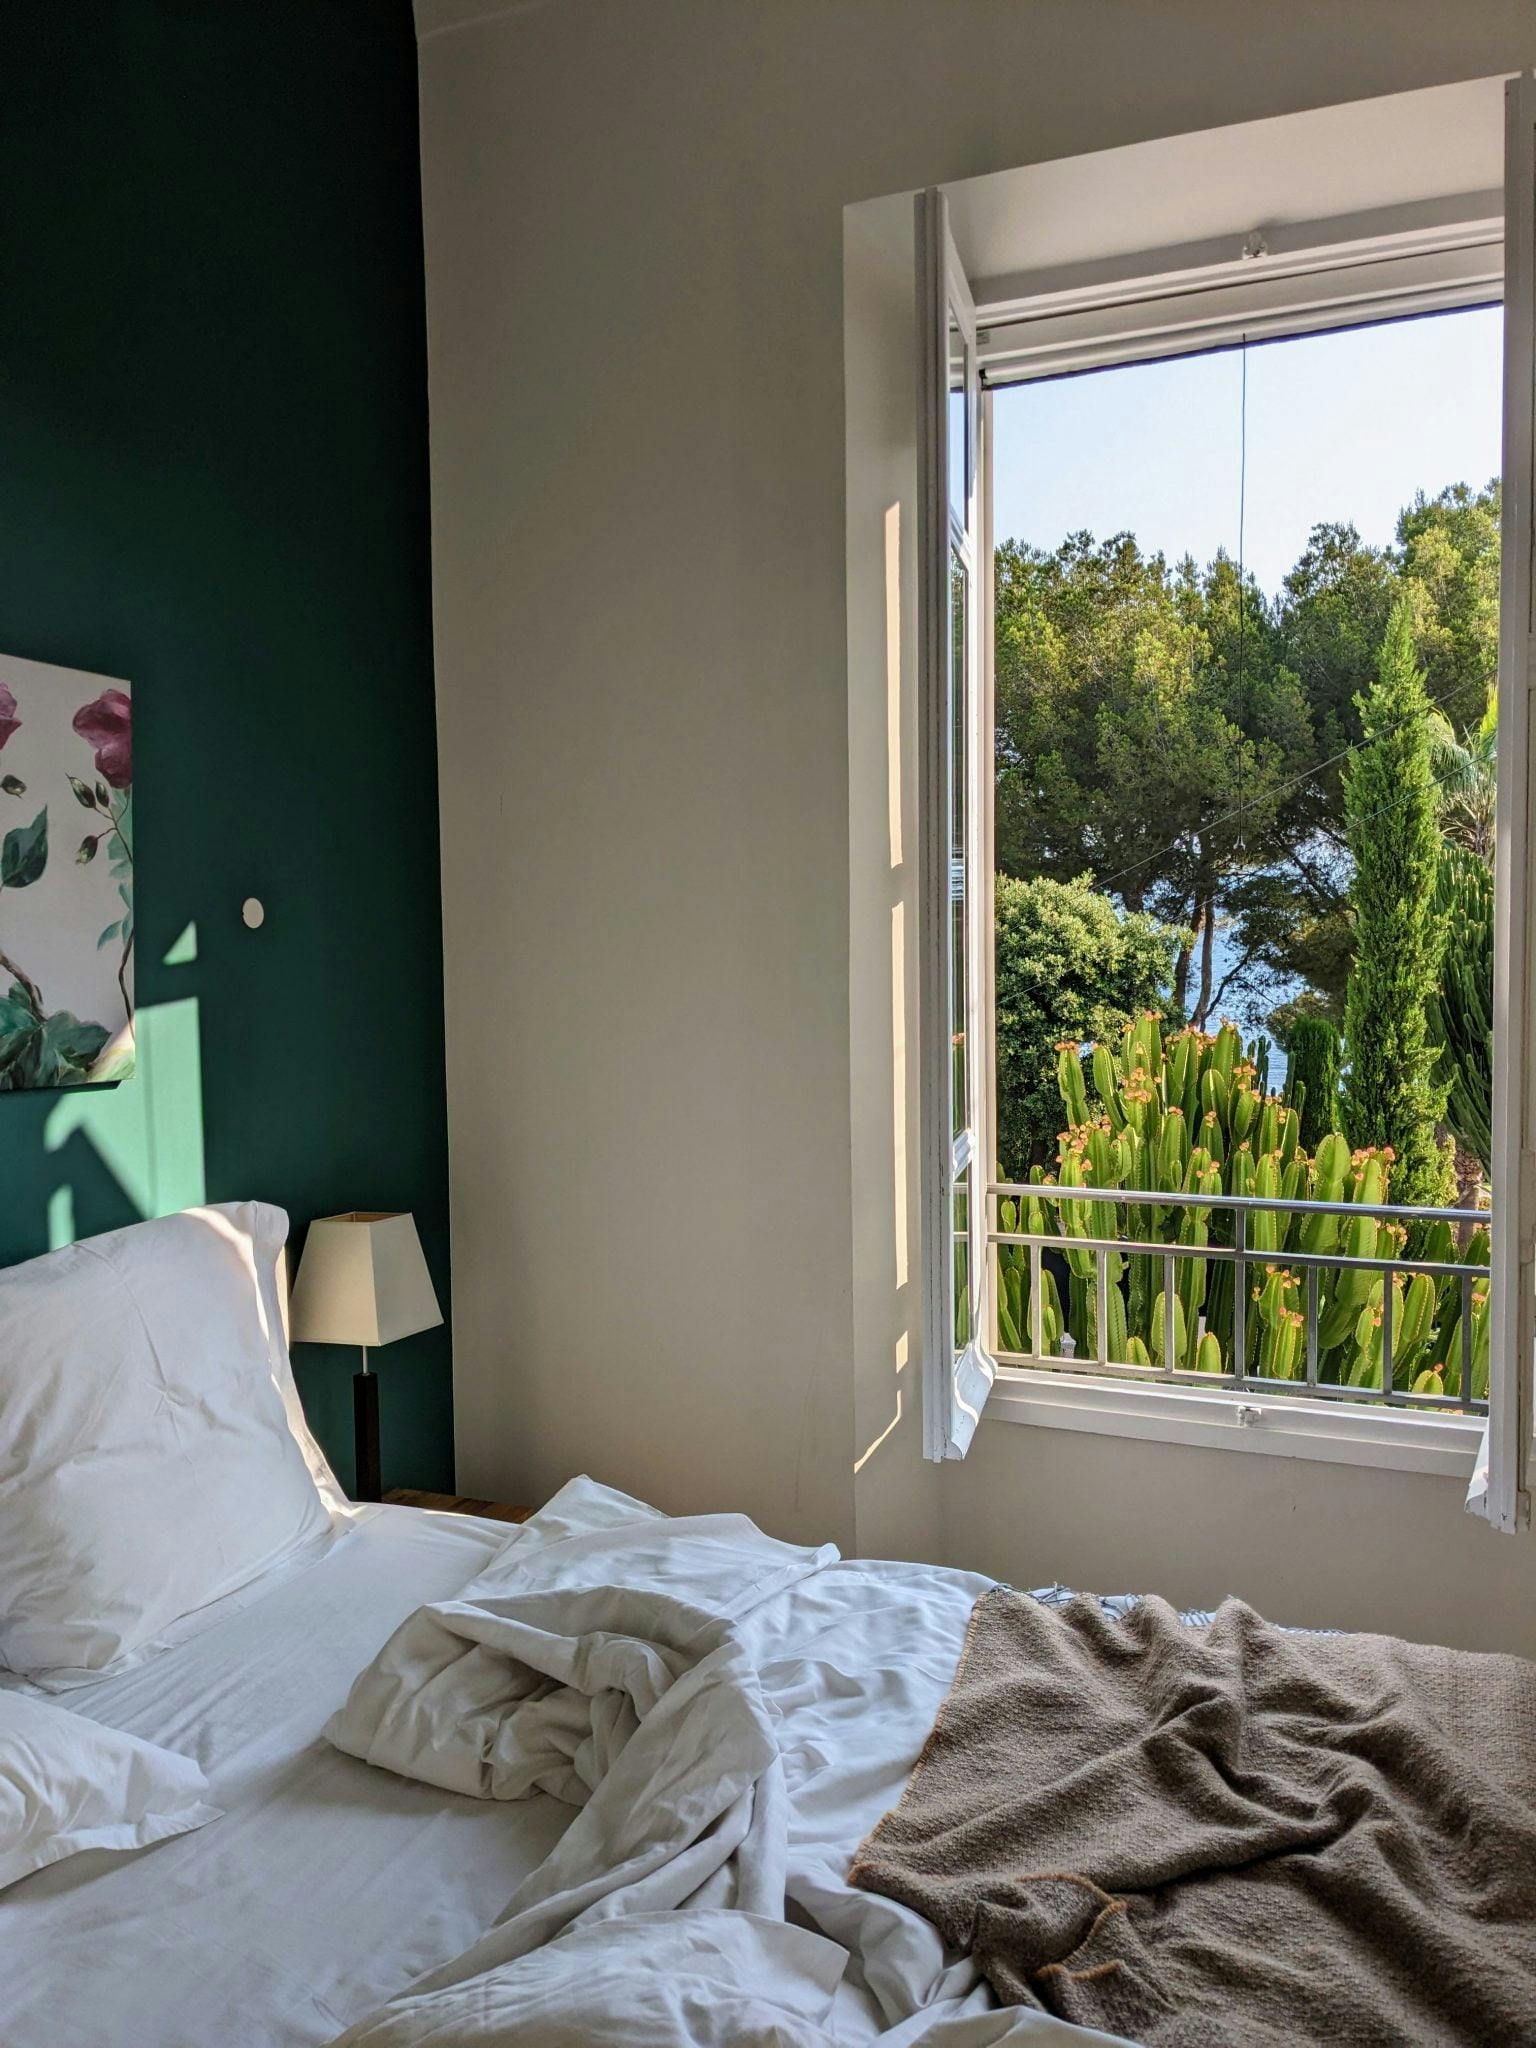 Room with green wall, unmade bed and view of a cactus and other green trees